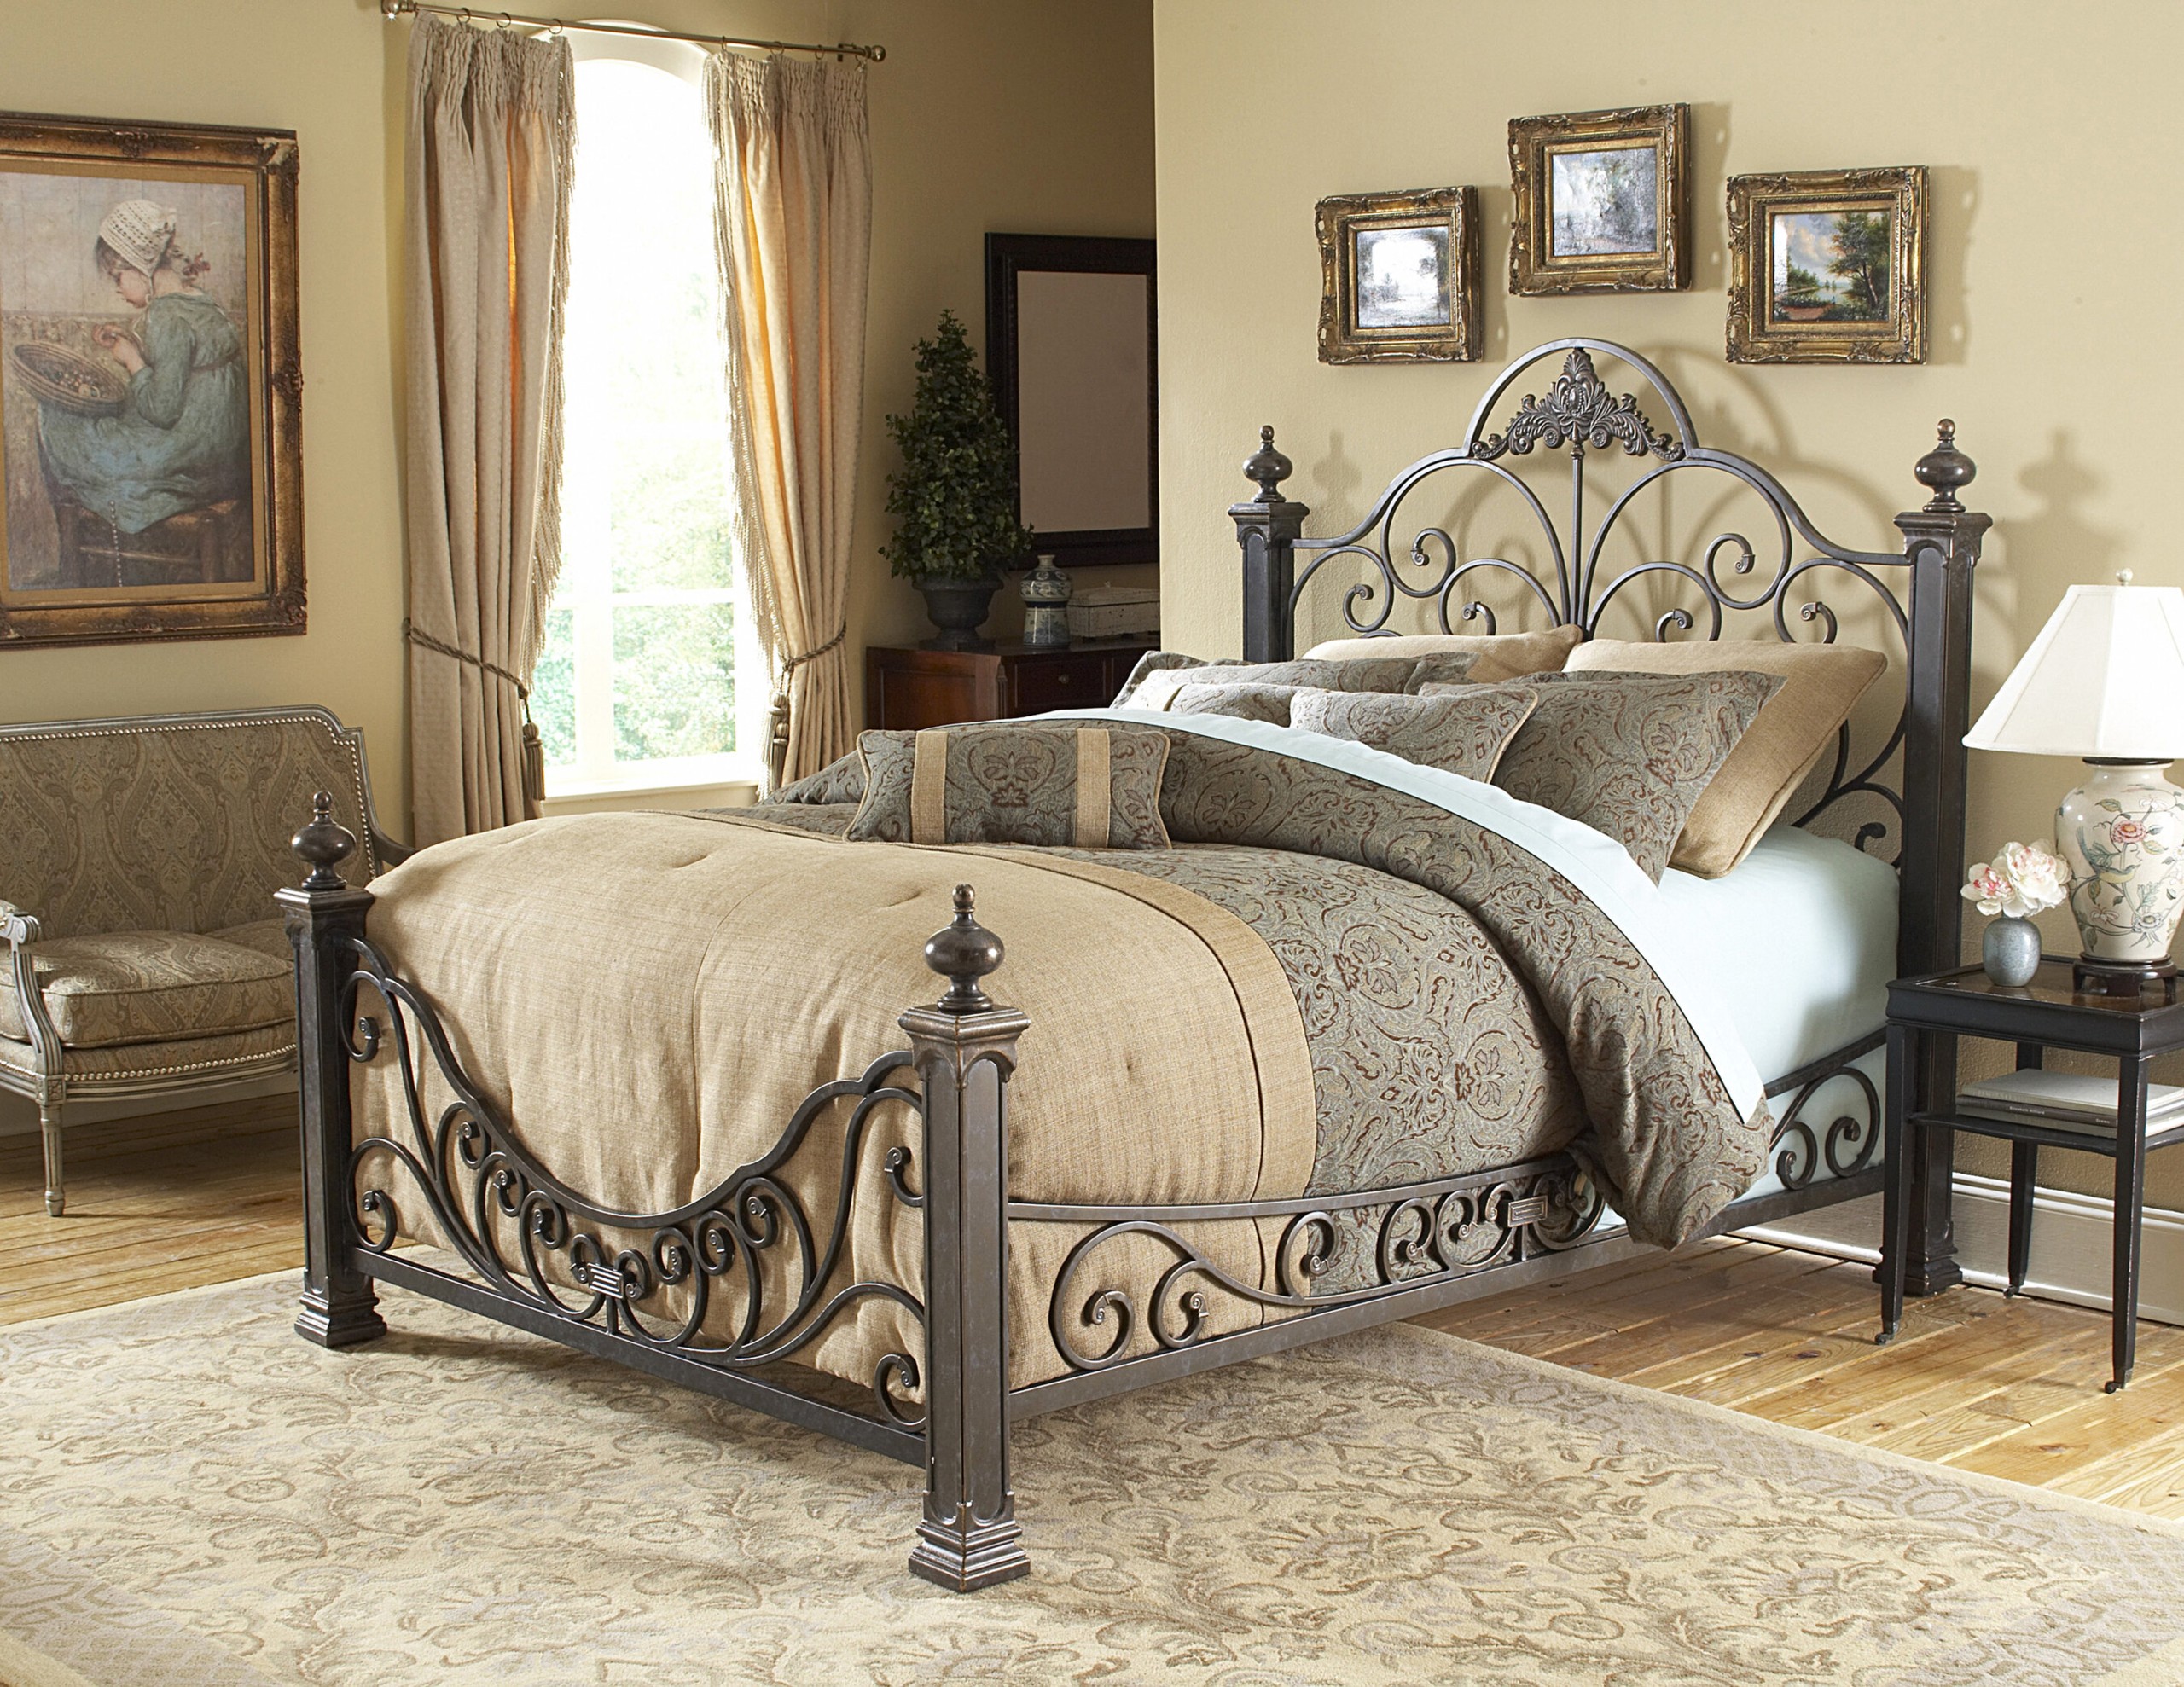 Wood and iron bed frame